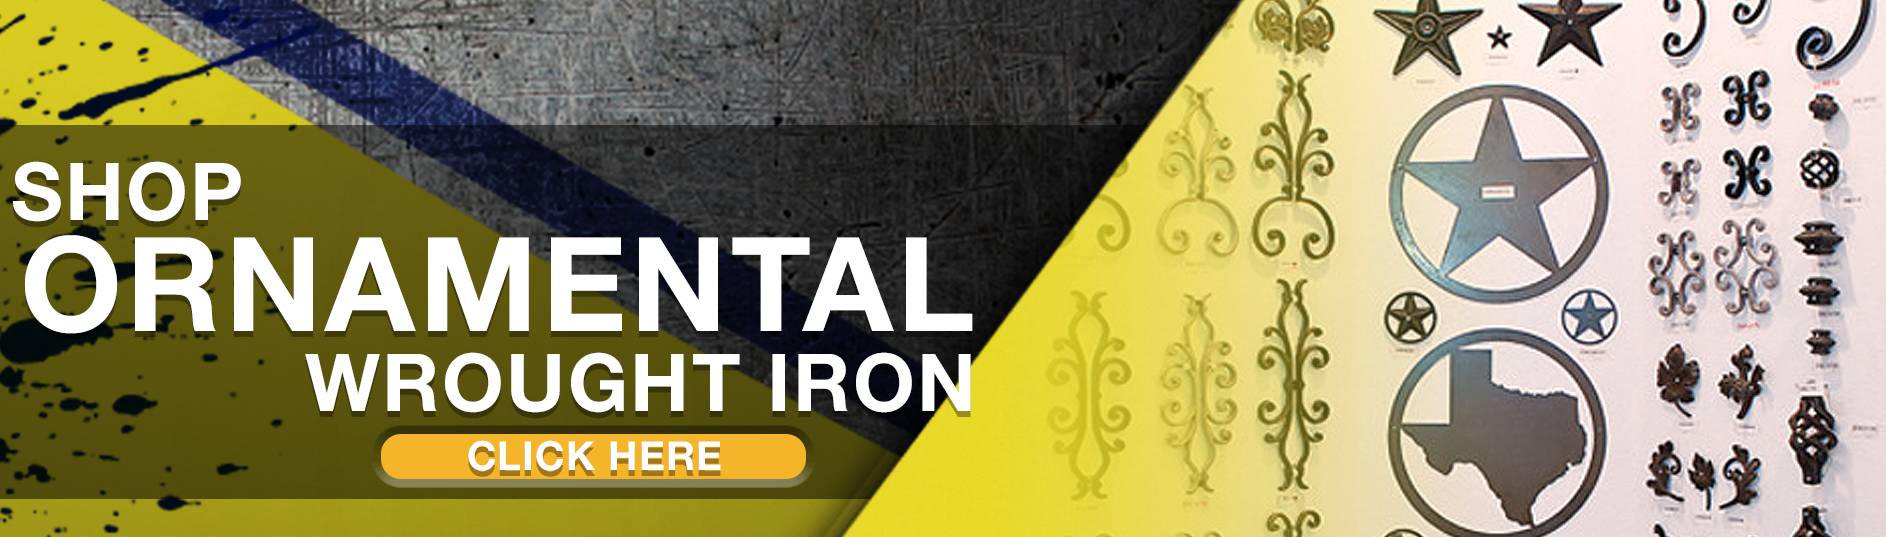 Click to browse our full selection of ornamental wrought iron at Eagle National Steel